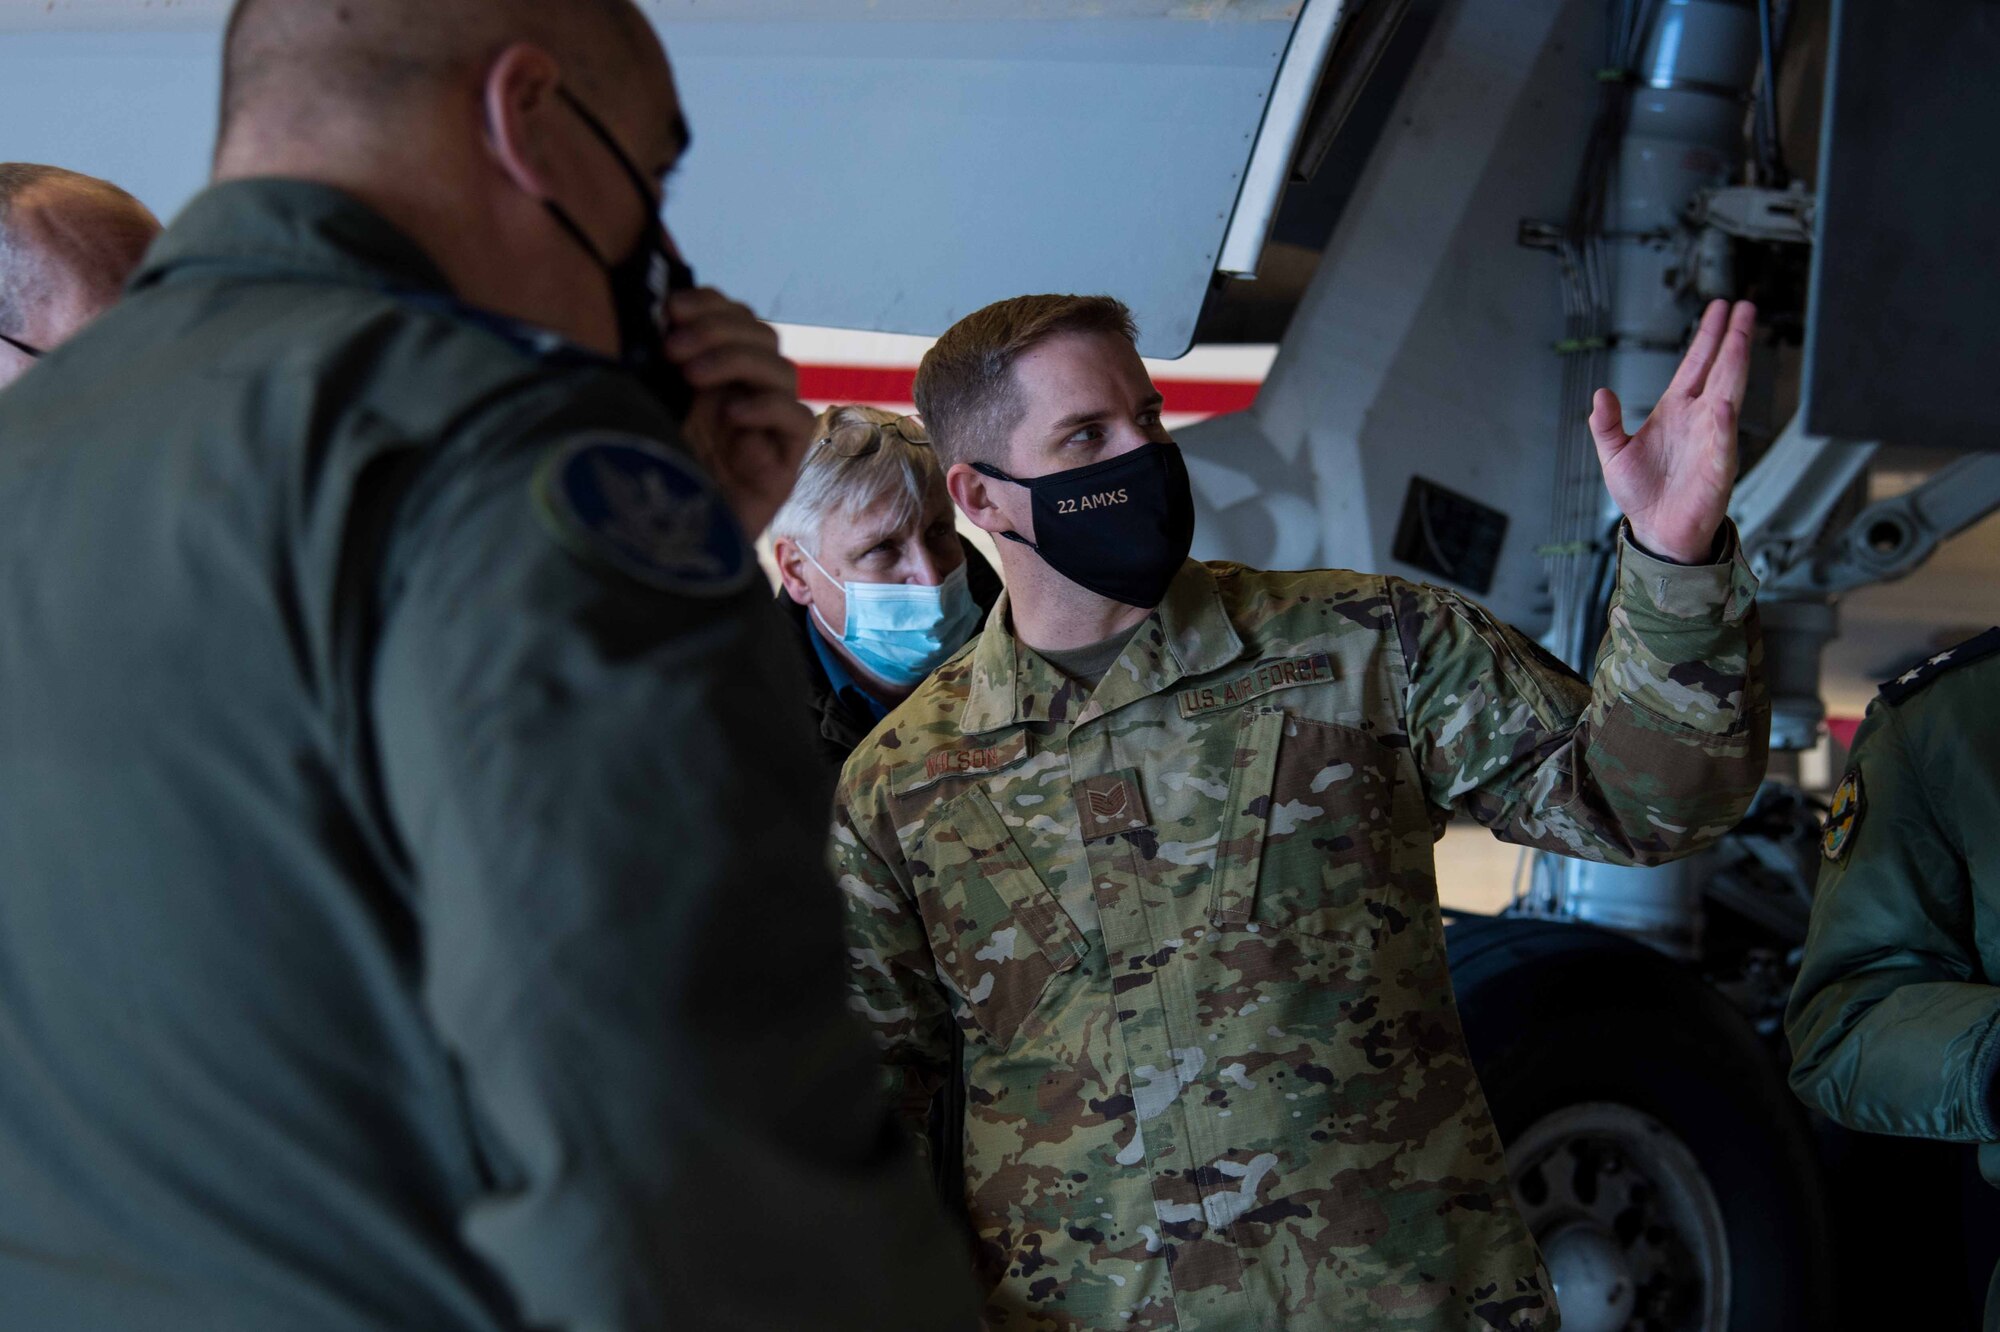 Tech. Sgt. Matthew Wilson, 22nd Aircraft Maintenance Squadron aerospace maintenance section noncommisioned officer in charge, gives Israeli Air Force members a tour of the KC-46A Pegasus’ exterior during their visit Dec. 8, 2020 at McConnell Air Force Base, Kansas.